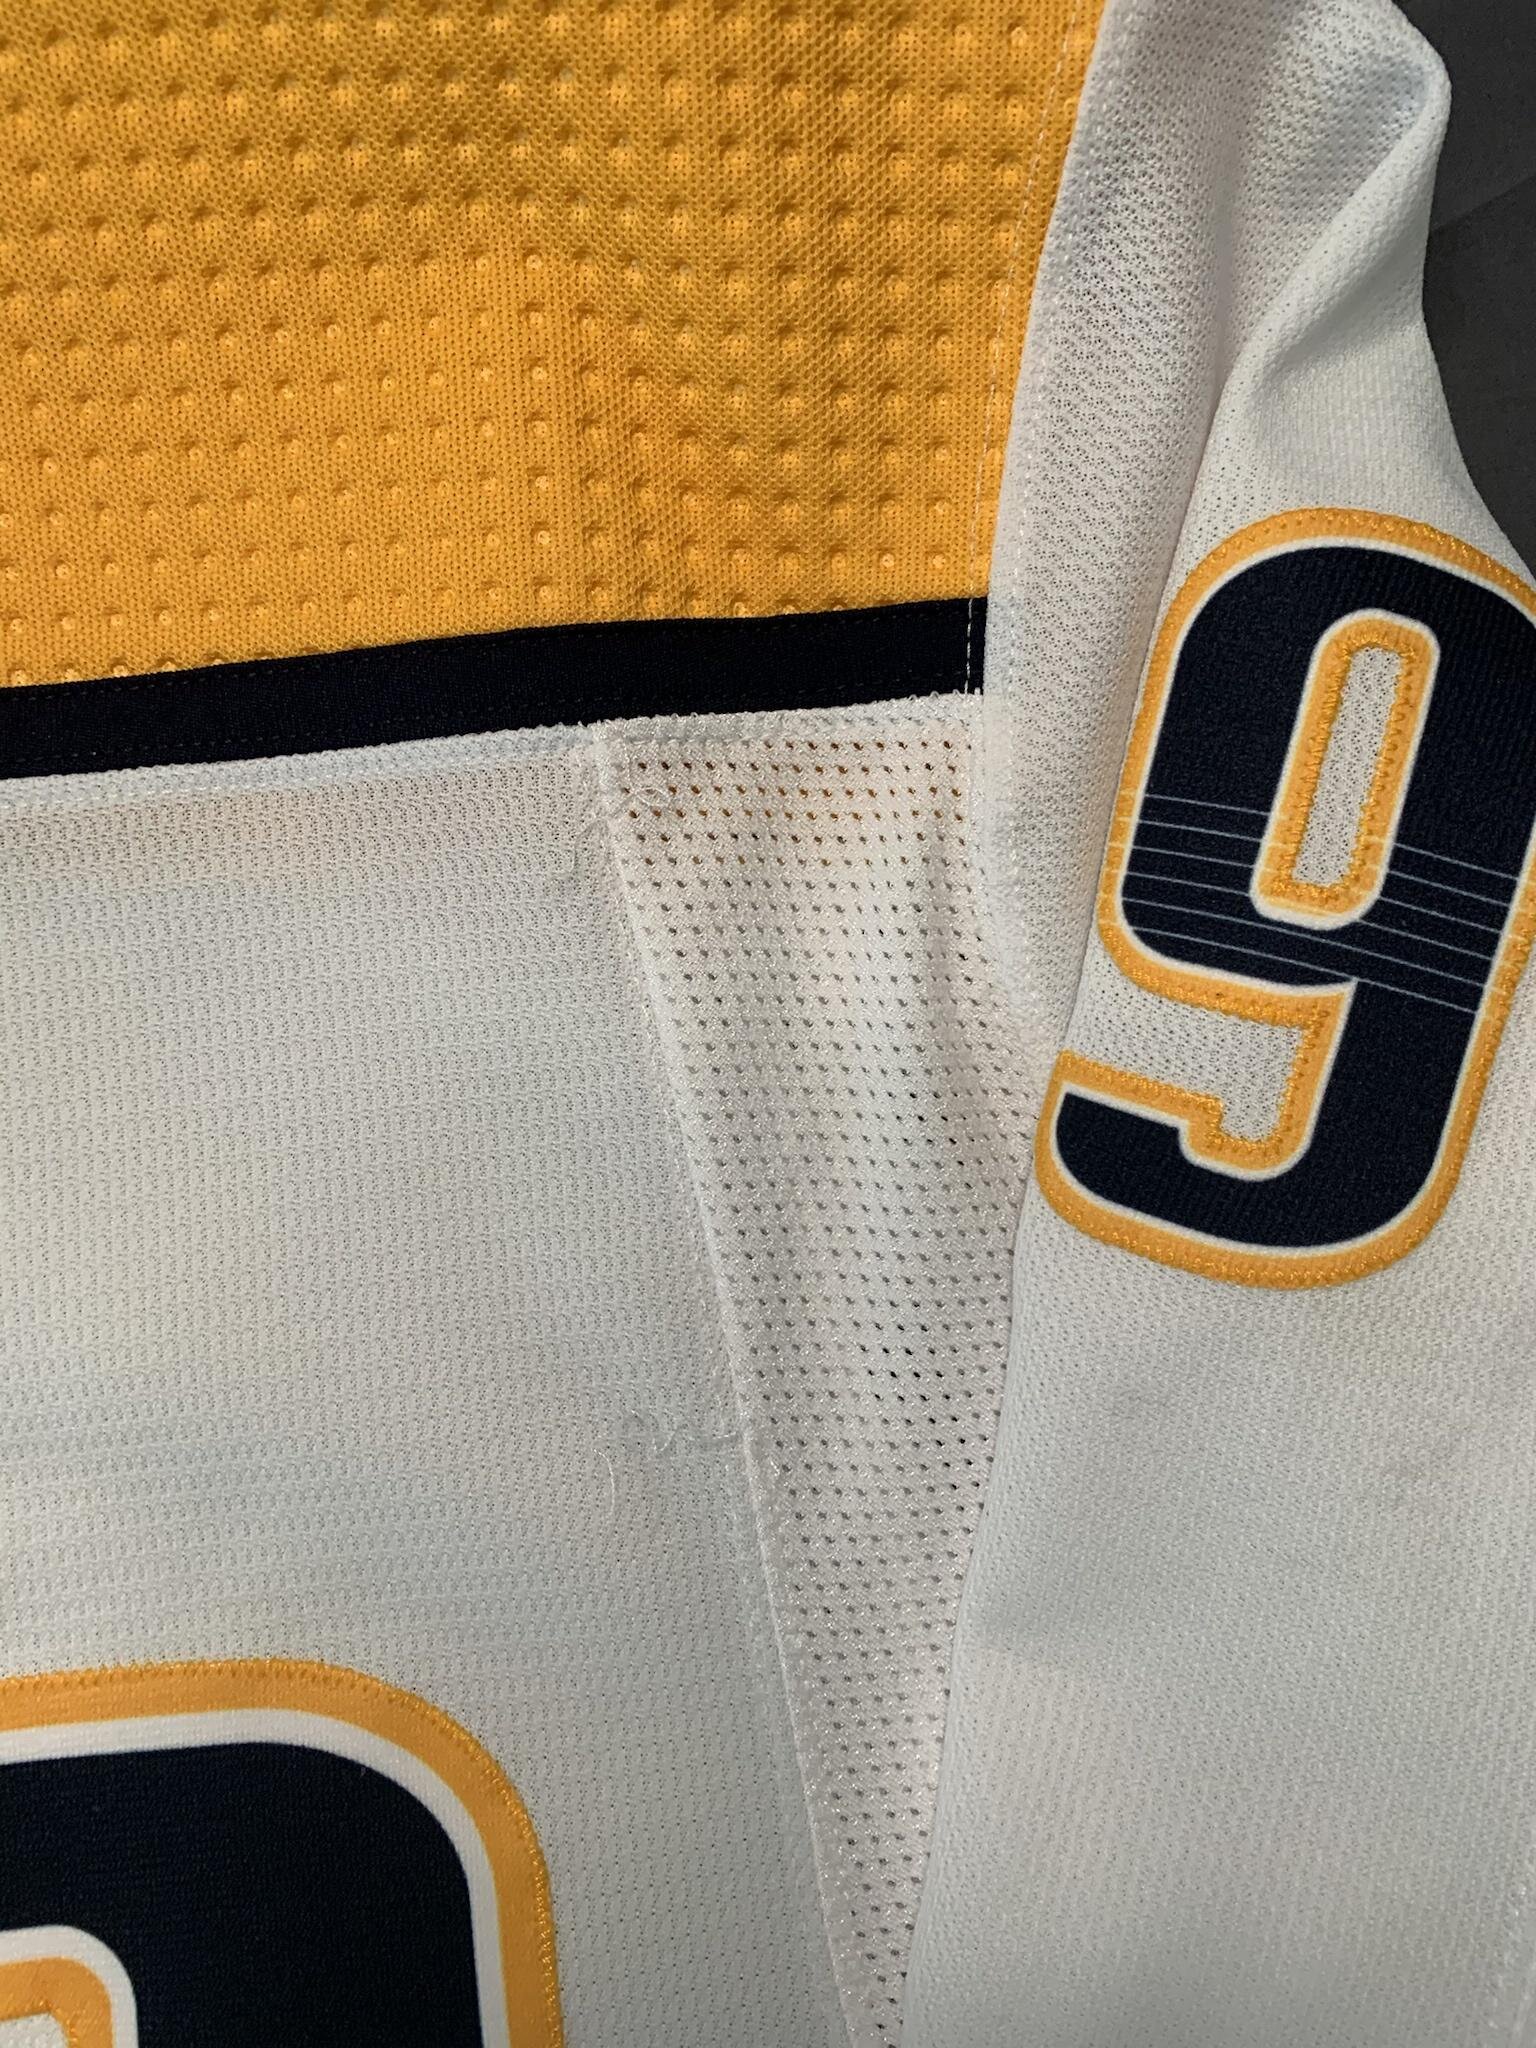 2020 Norris Trophy winner Roman Josi Preds Winter Classic jersey mailday!  The wait for this one was long but well worth it! : r/hockeyjerseys